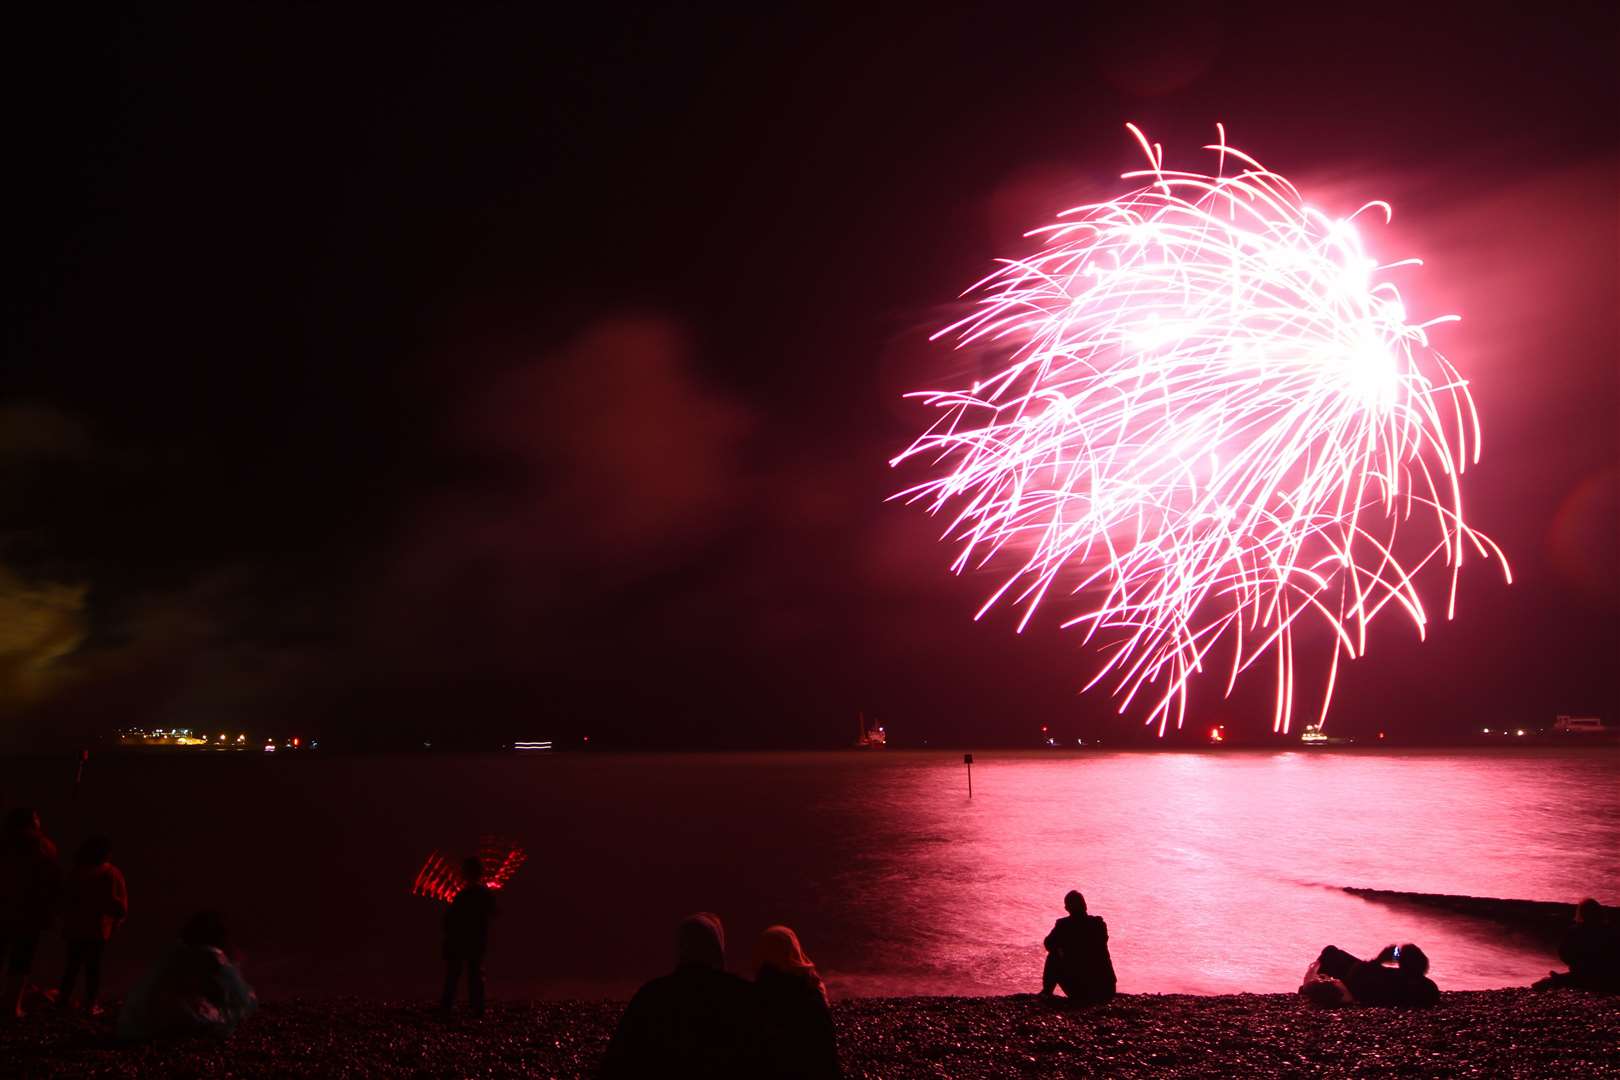 The lighting of a cauldron at Dover was followed by a fireworks show